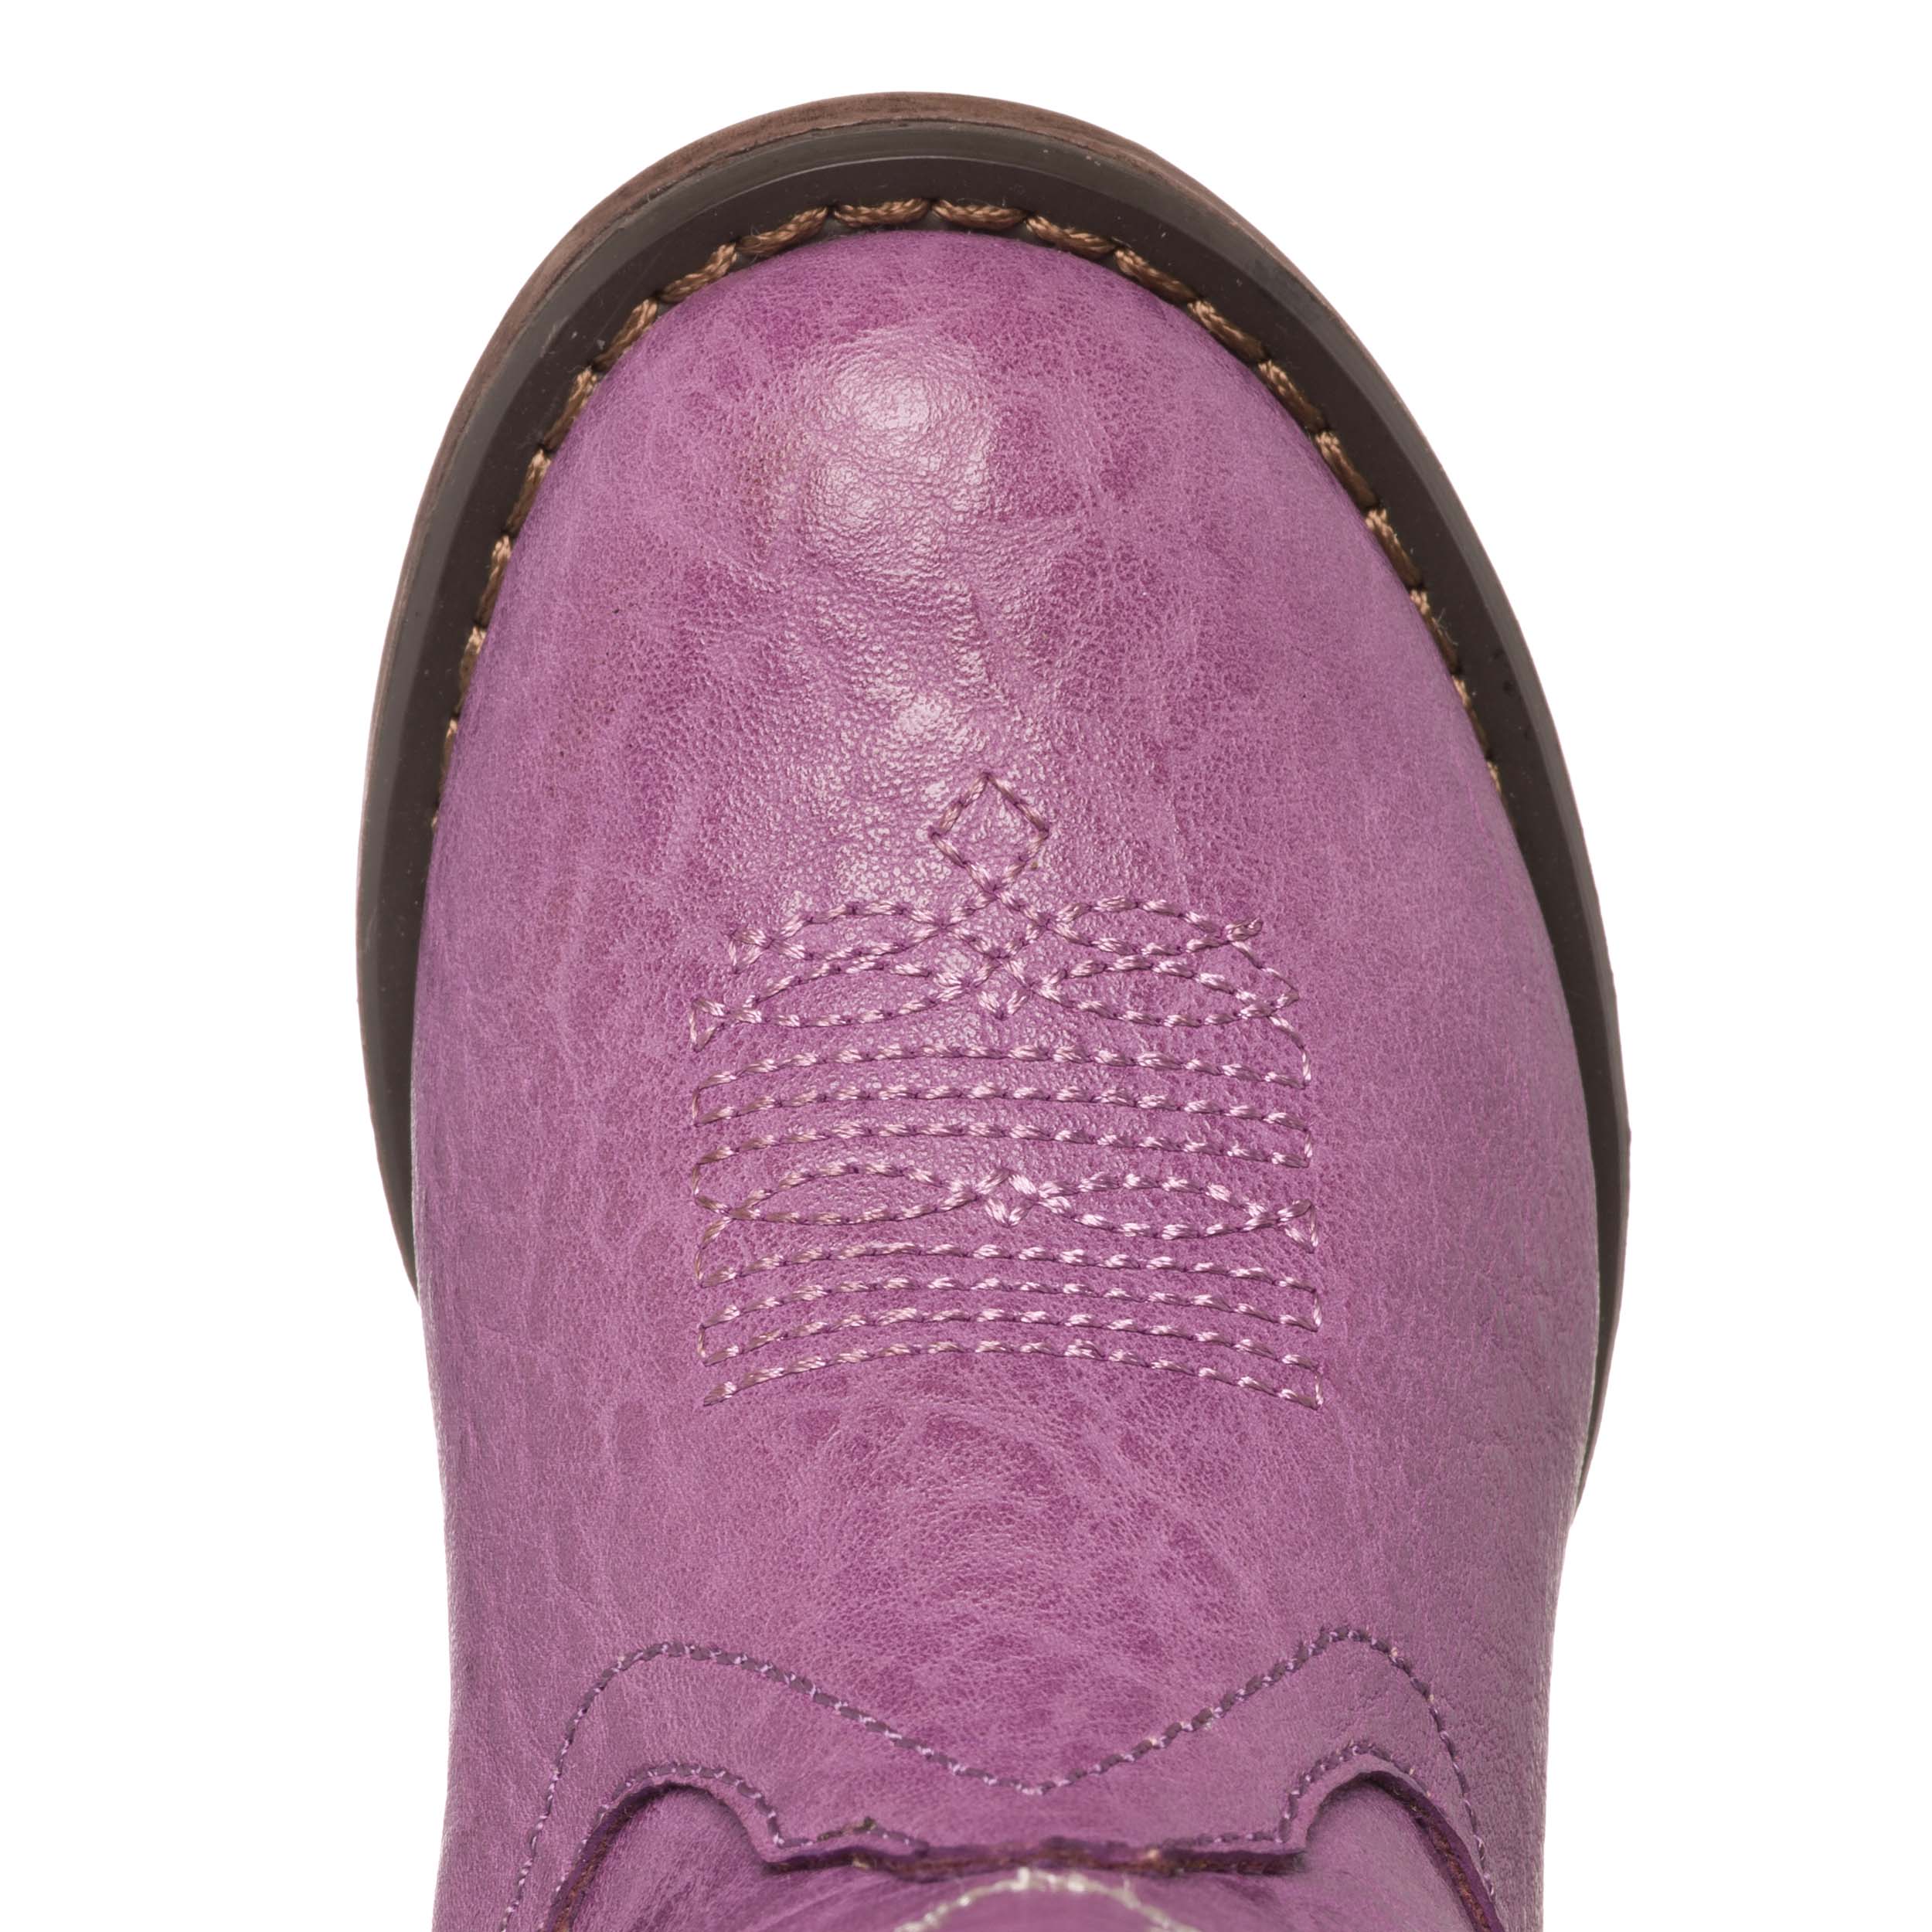 Children Western Kids Cowboy Boot | Toddler Monterey Purple for Girls by Silver Canyon